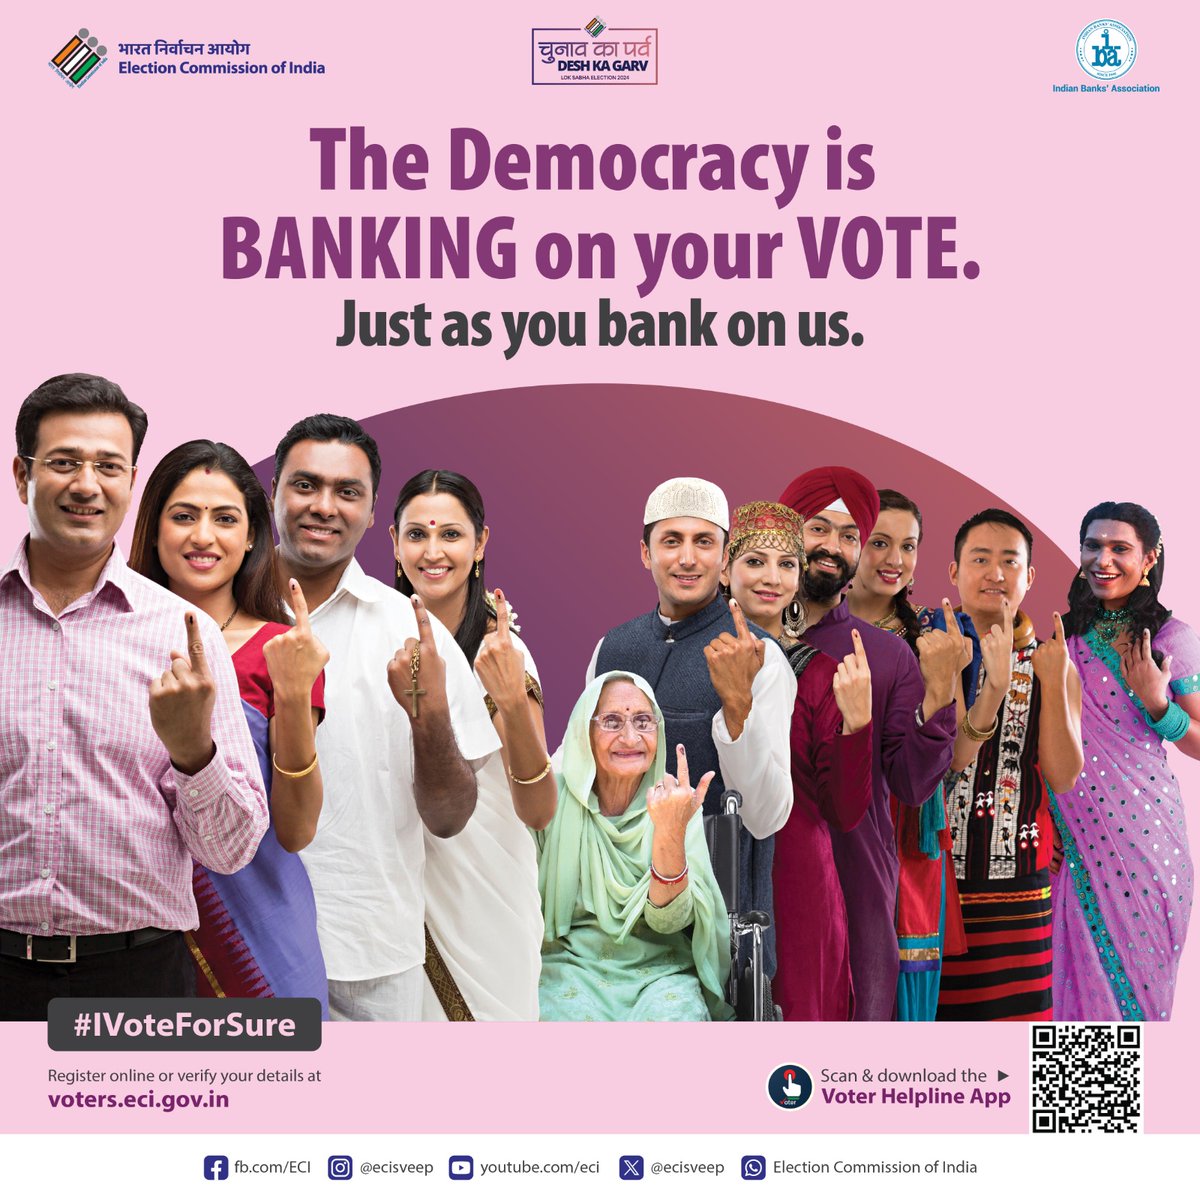 Your voice counts! Cast your vote and shape the future of the nation.

#EveryVoteMatters #IVoteForSure #IndianBank
@DFS_India